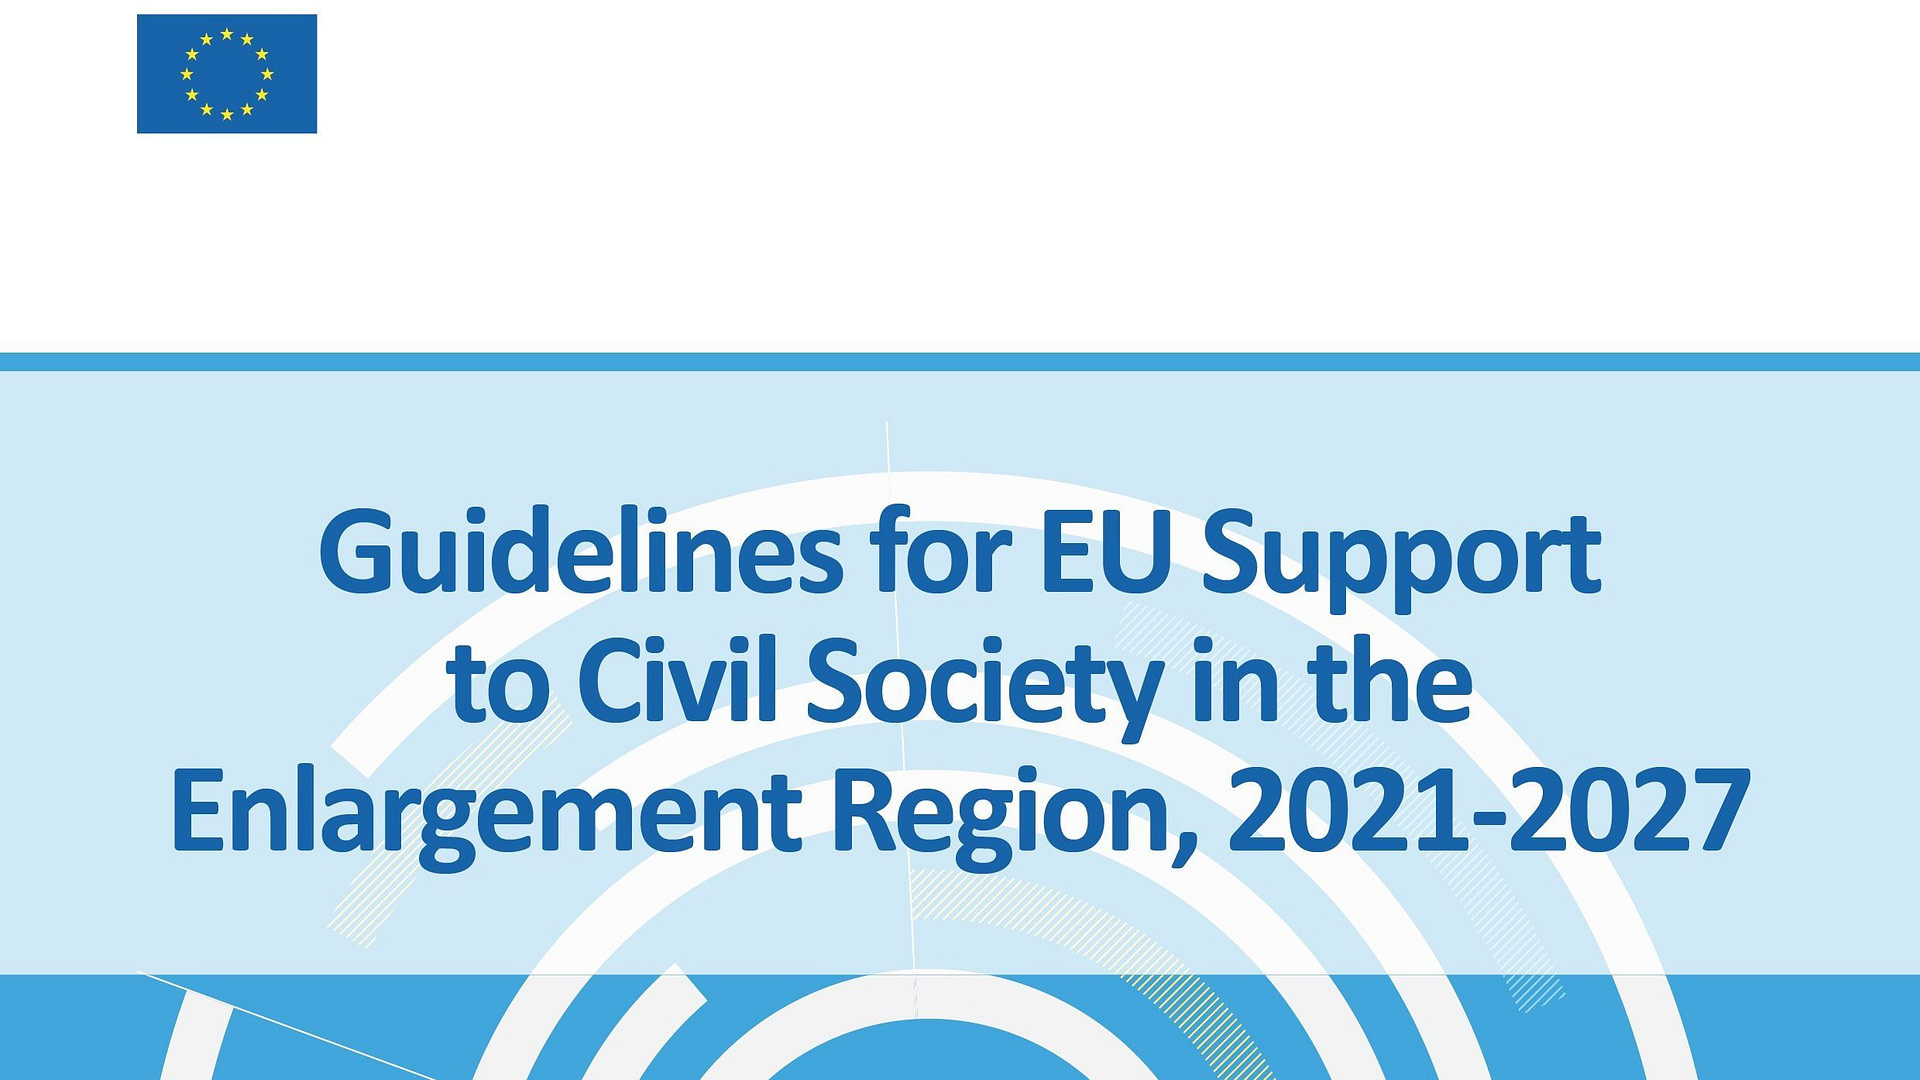 Guidelines for EU Support to Civil Society in the Enlargement Region, 2021-2027 Country Consultations Stage – Background Information